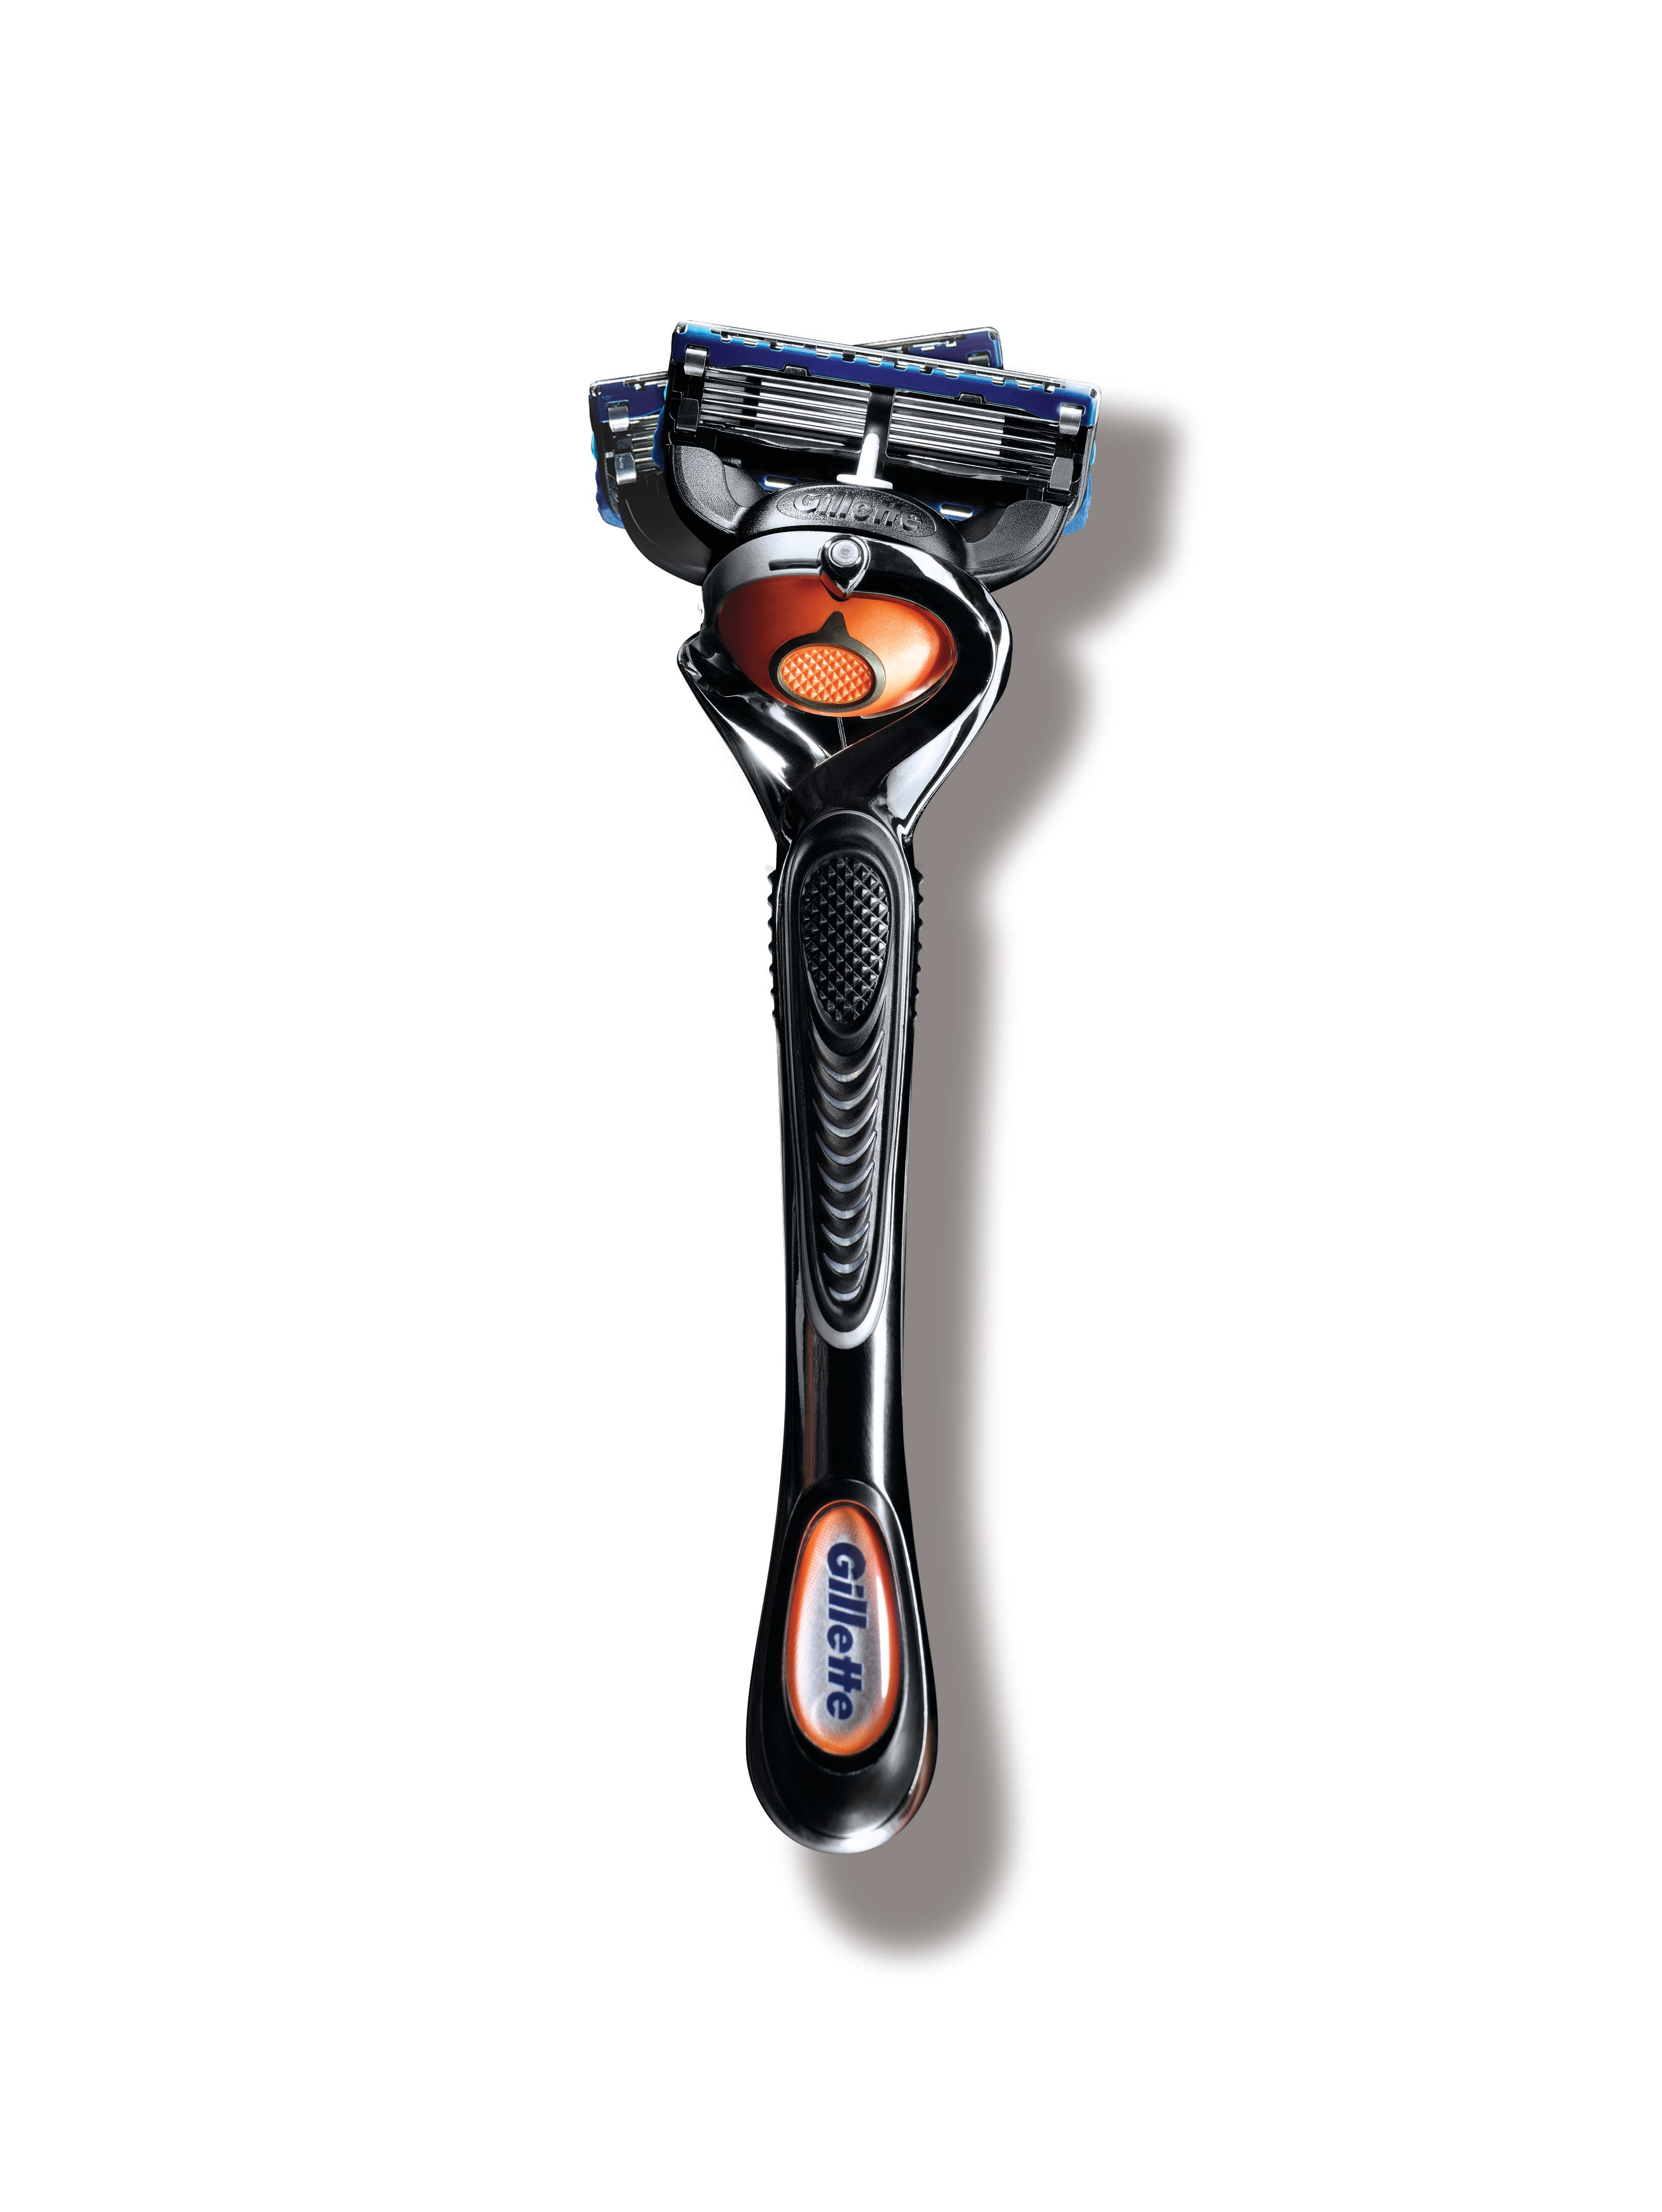 Gillette “Shaving Rebuilt” Launch New Fusion ProGlide with FlexBall™ | Business Wire